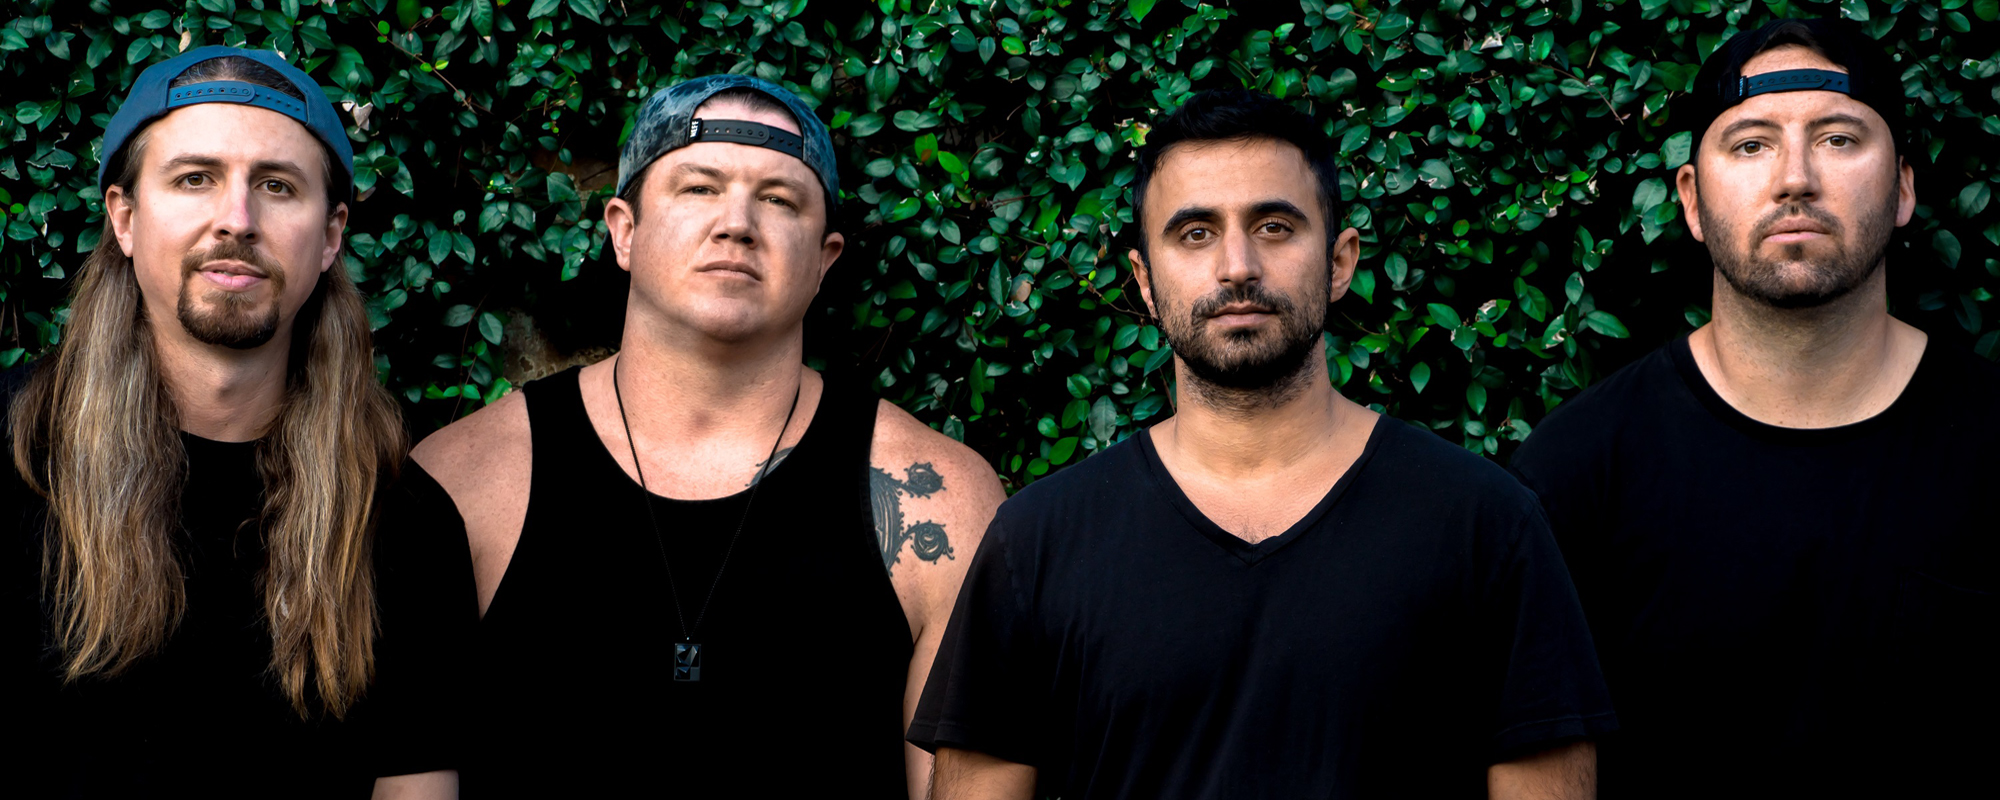 Celebrating Their Fans On New Single, Rebelution Asks: Are You Satisfied?